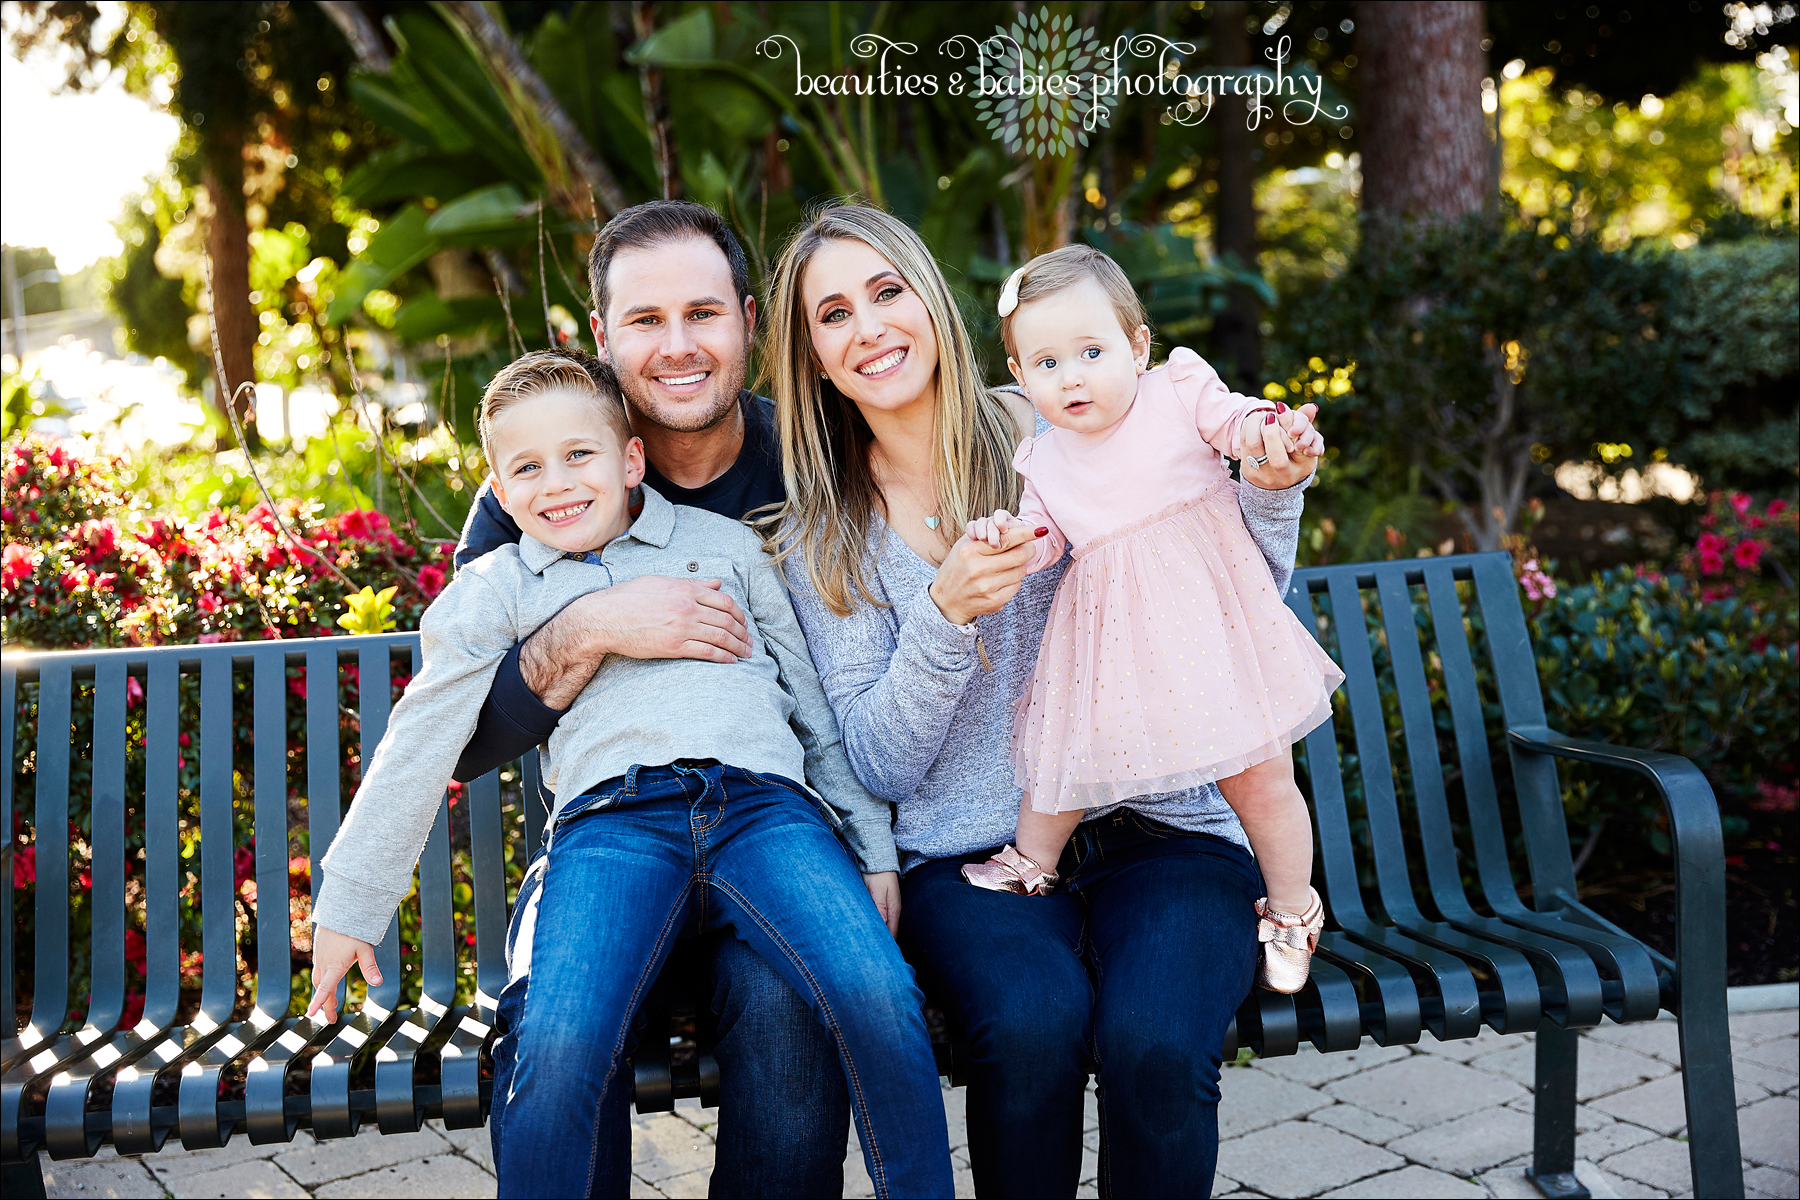 Outdoor park family and baby photography Los Angeles professional kids photographer